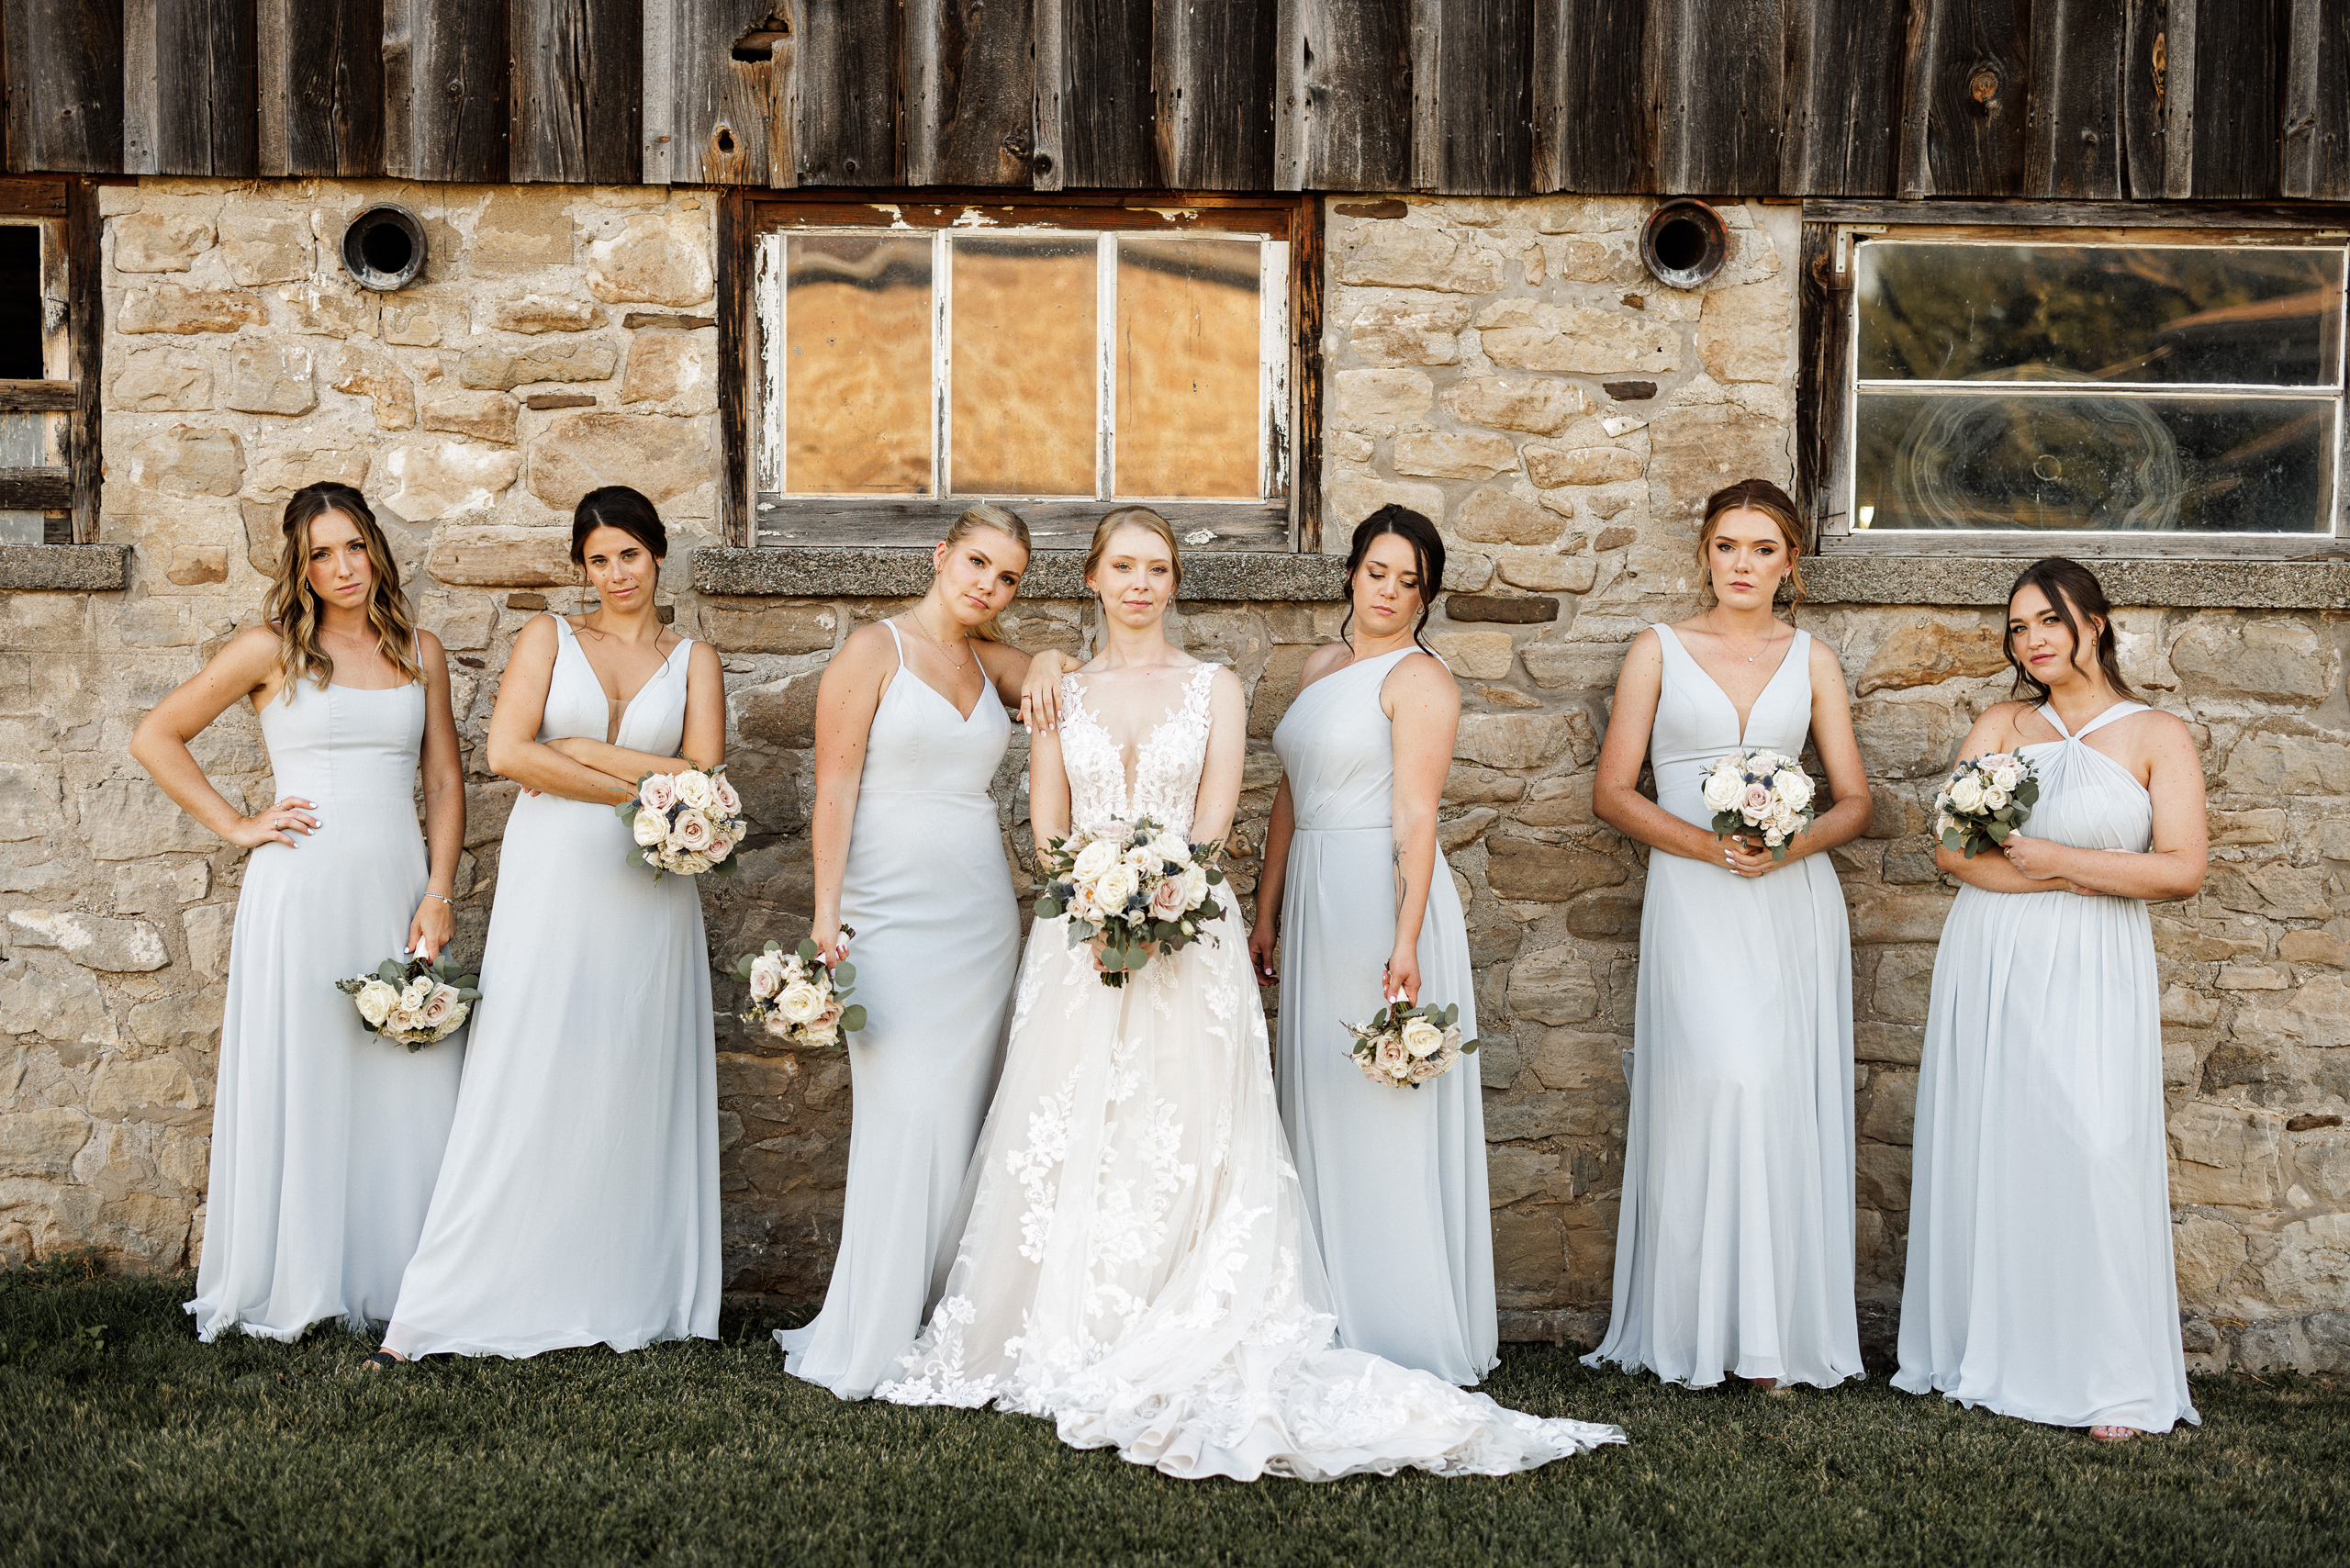 wedding party bridal group photo barn cave spring vineyard summer afterglow